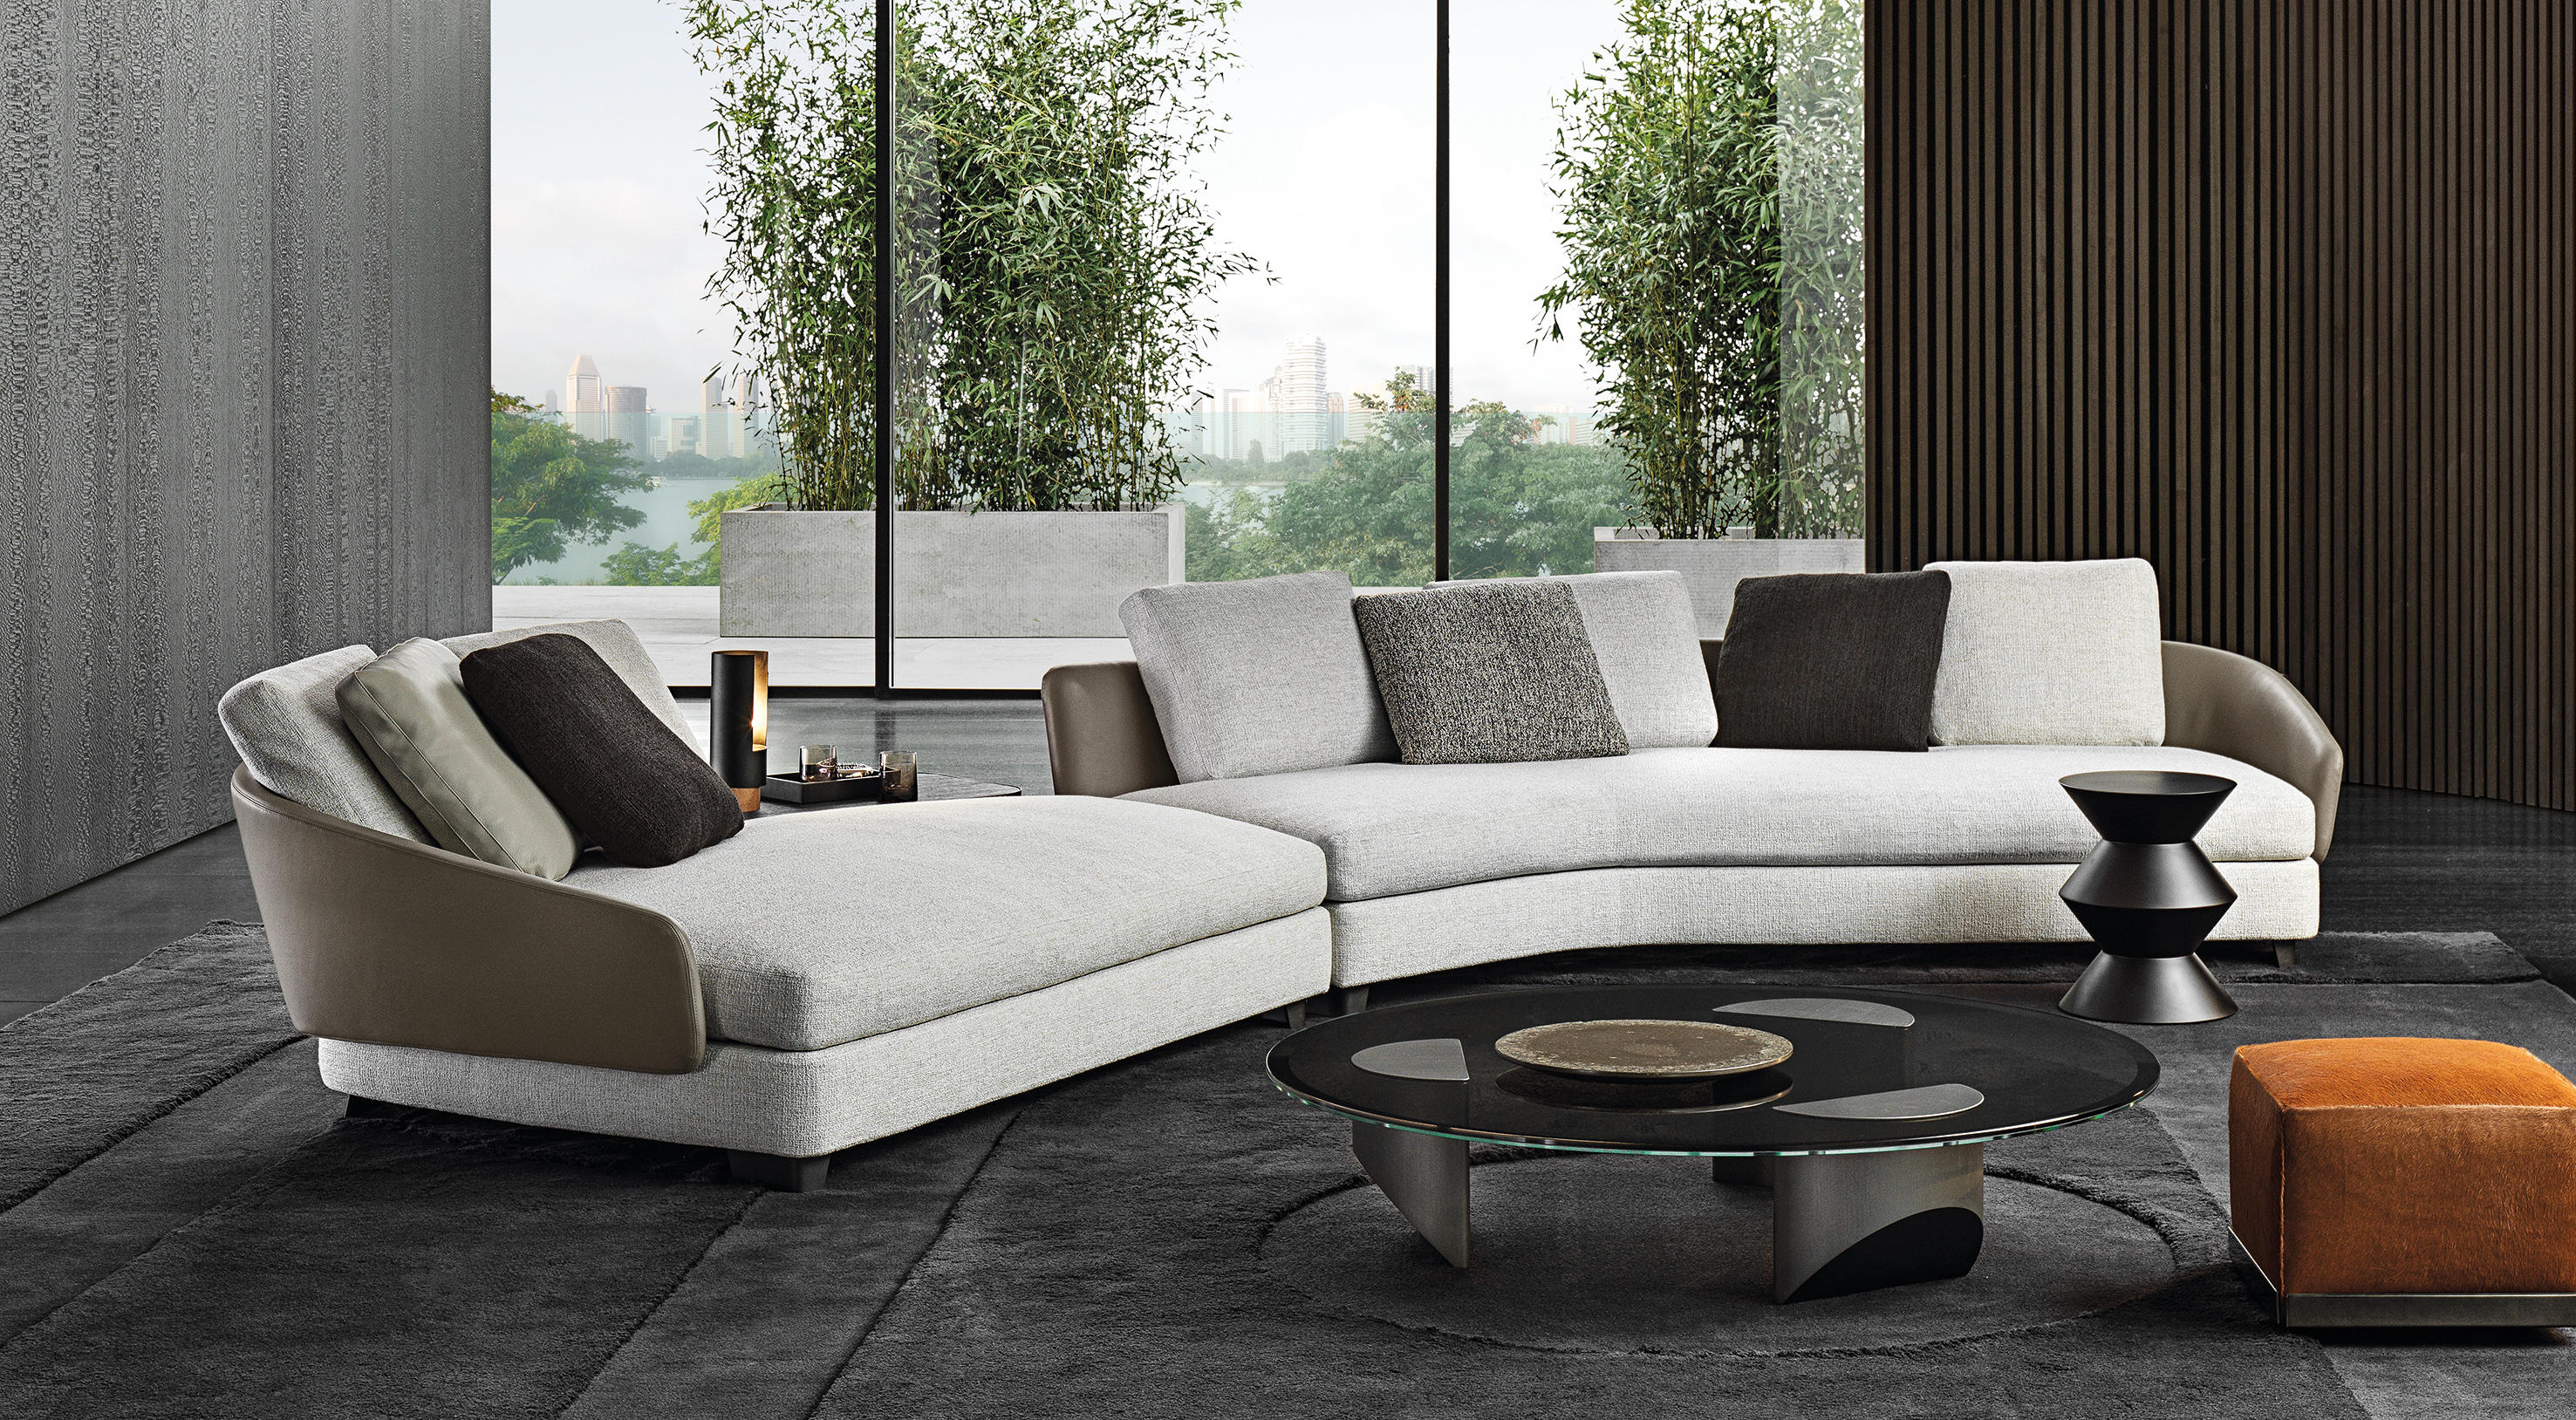 Lawson Seating Collection by Rodolfo Dordoni for Minotti